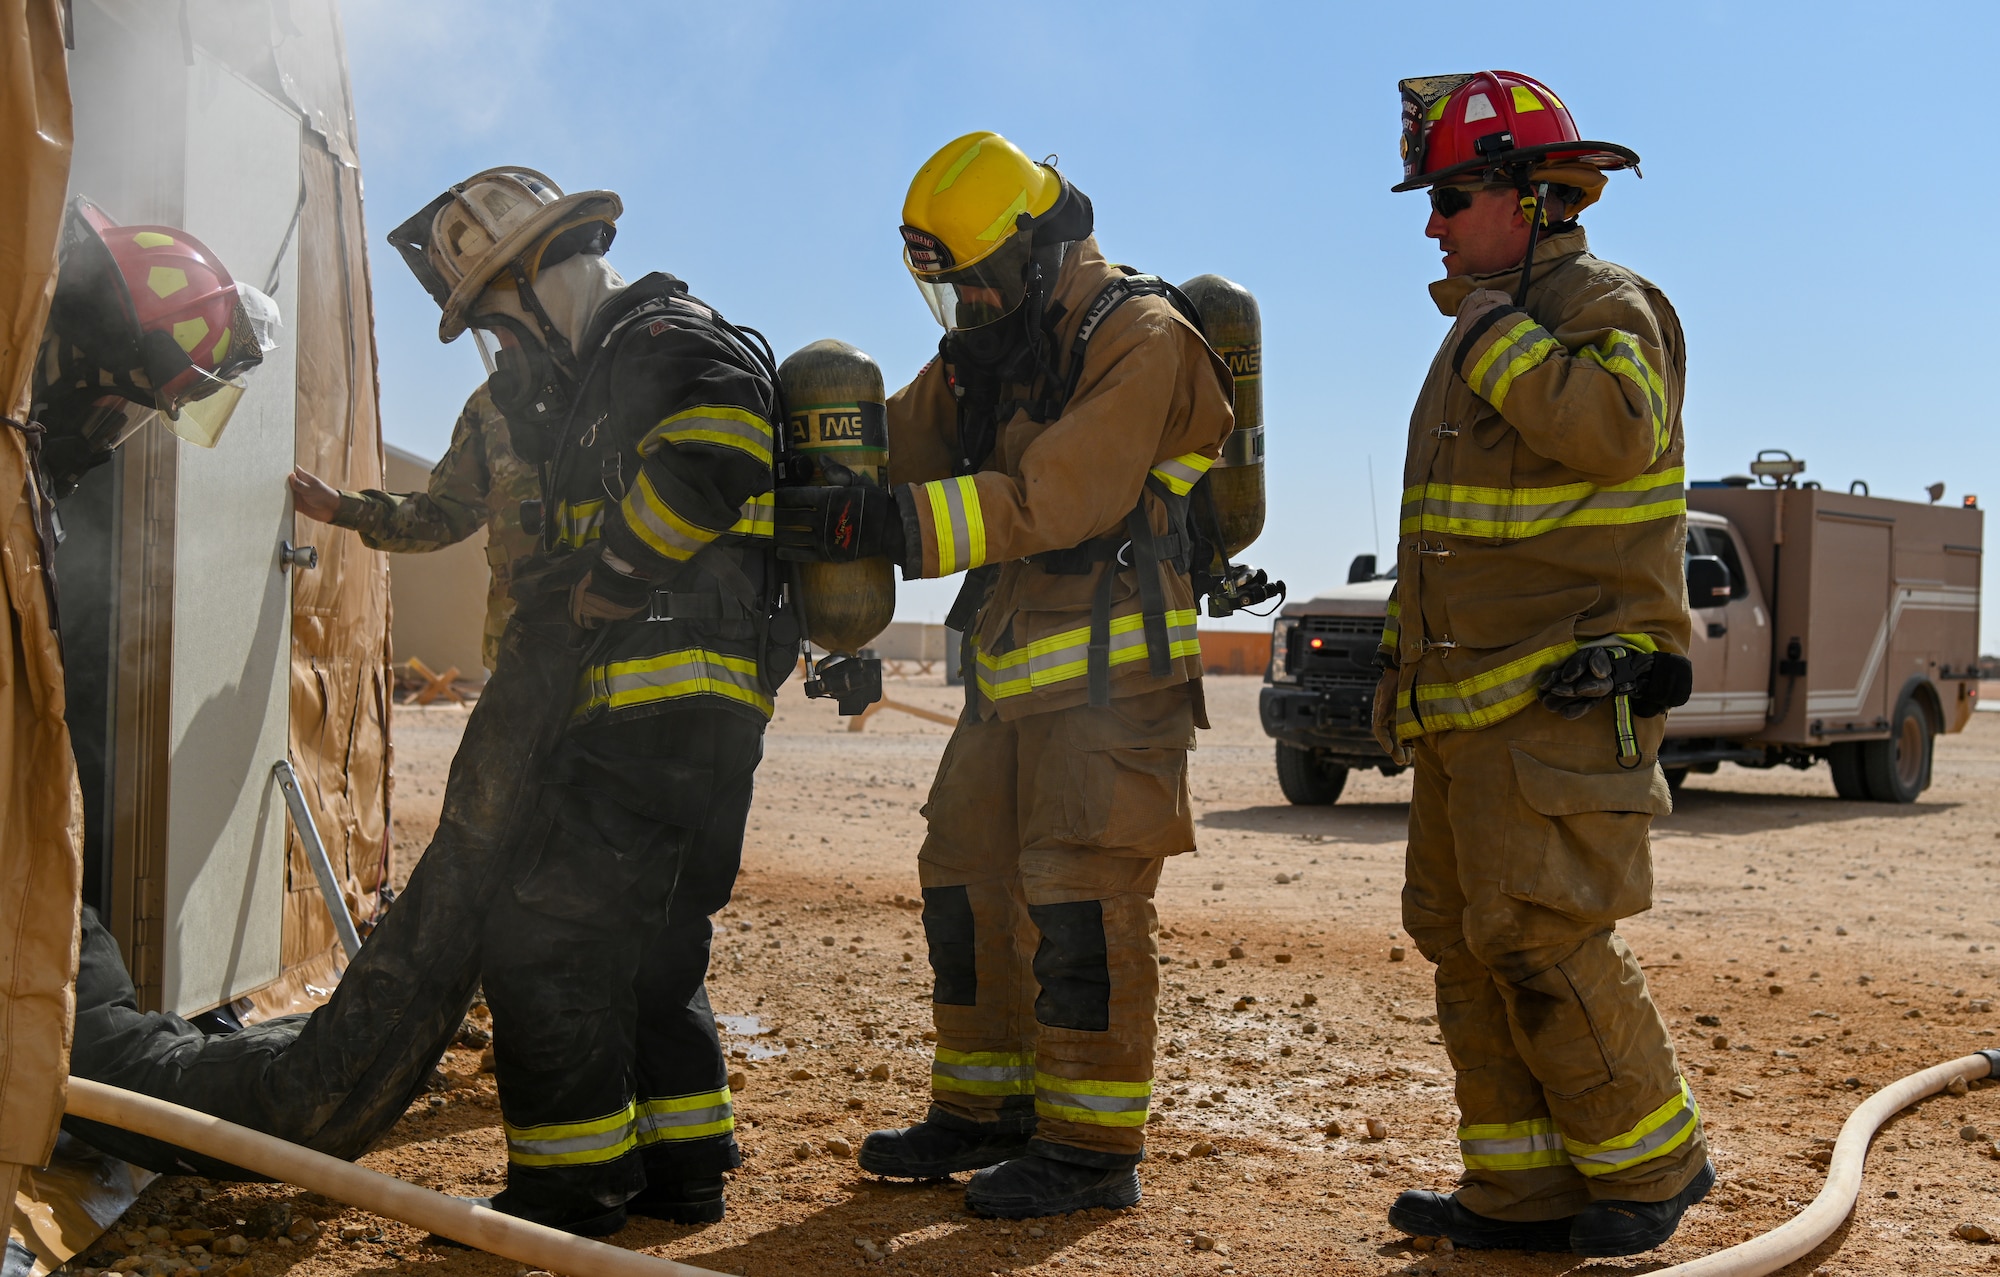 U.S. Air Force Brig. Gen. Robert Davis, second from the left, 378th Air Expeditionary Wing commander, simulates extracting personnel from a structure fire alongside members of the 378th Expeditionary Civil Engineer Squadron  at Prince Sultan Air Base, Kingdom of Saudi Arabia, Dec. 9, 2021. Members of the 378th ECES taught Davis how to don a complete fire suit as well as how to properly extinguish a structure fire. (U.S. Air Force photo by Staff Sgt. Christina Graves)